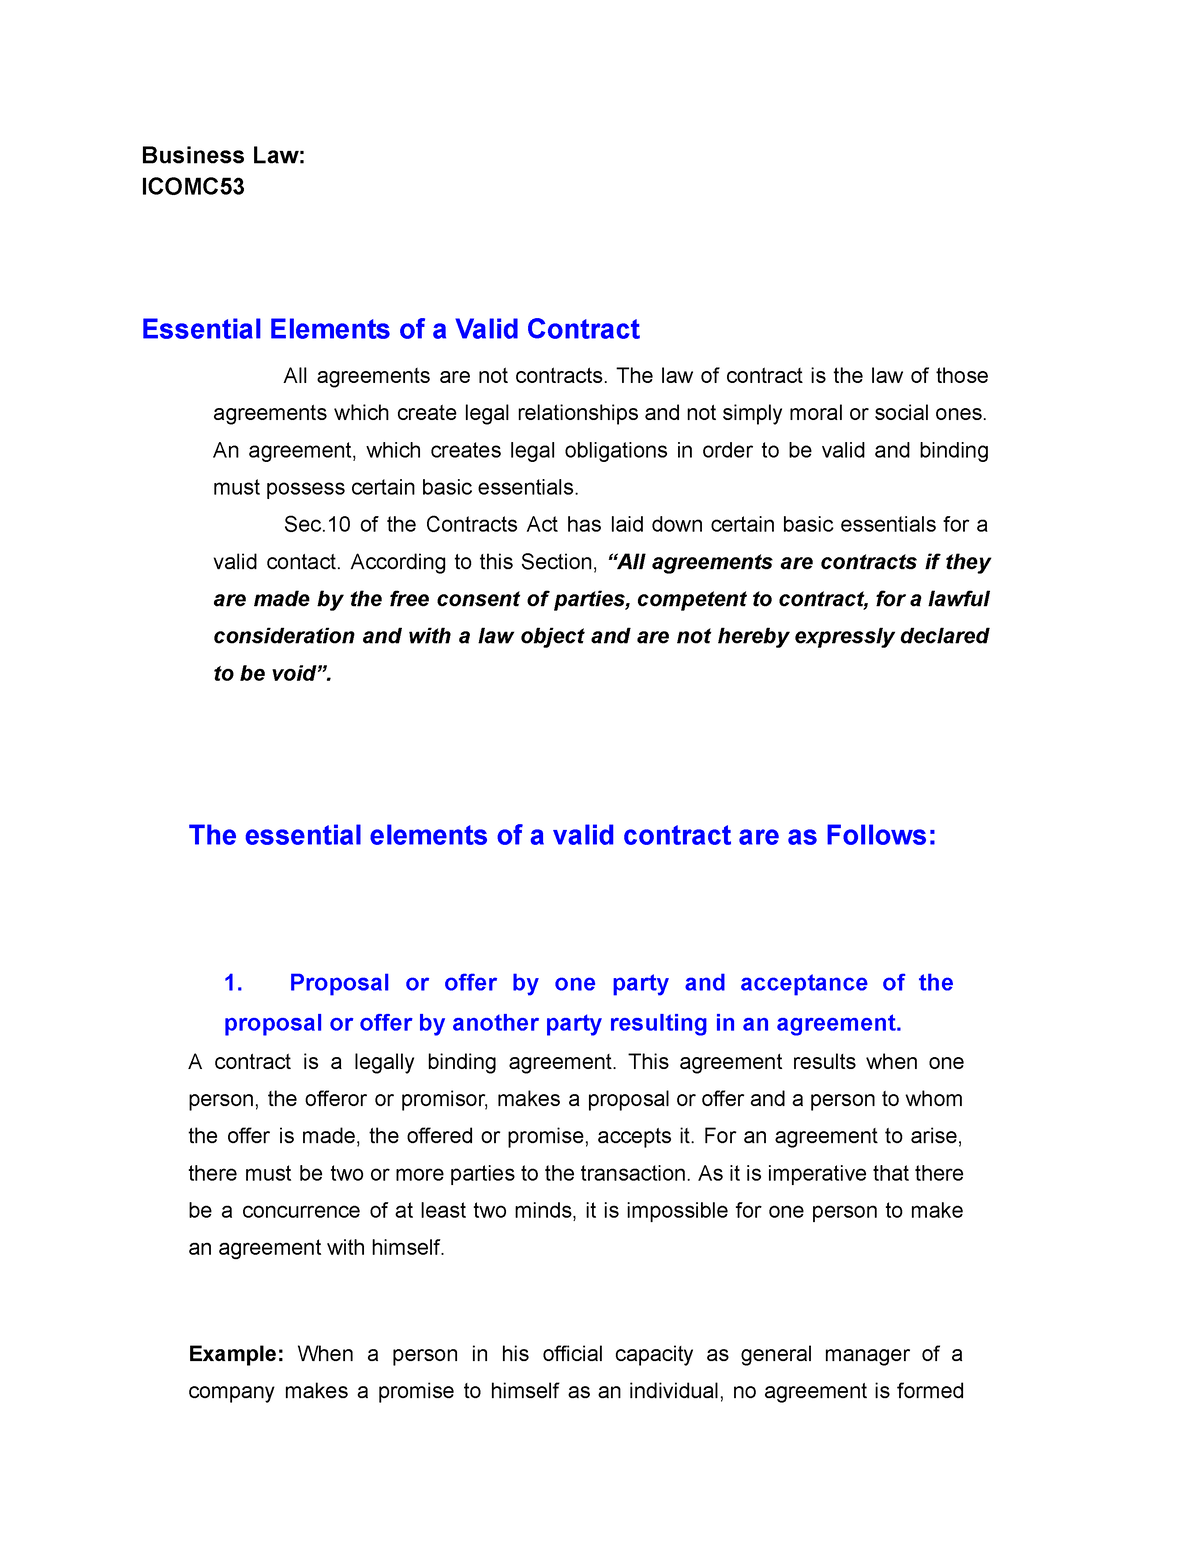 Essential Elements Of A Valid Contract Business Law Icomc Essential